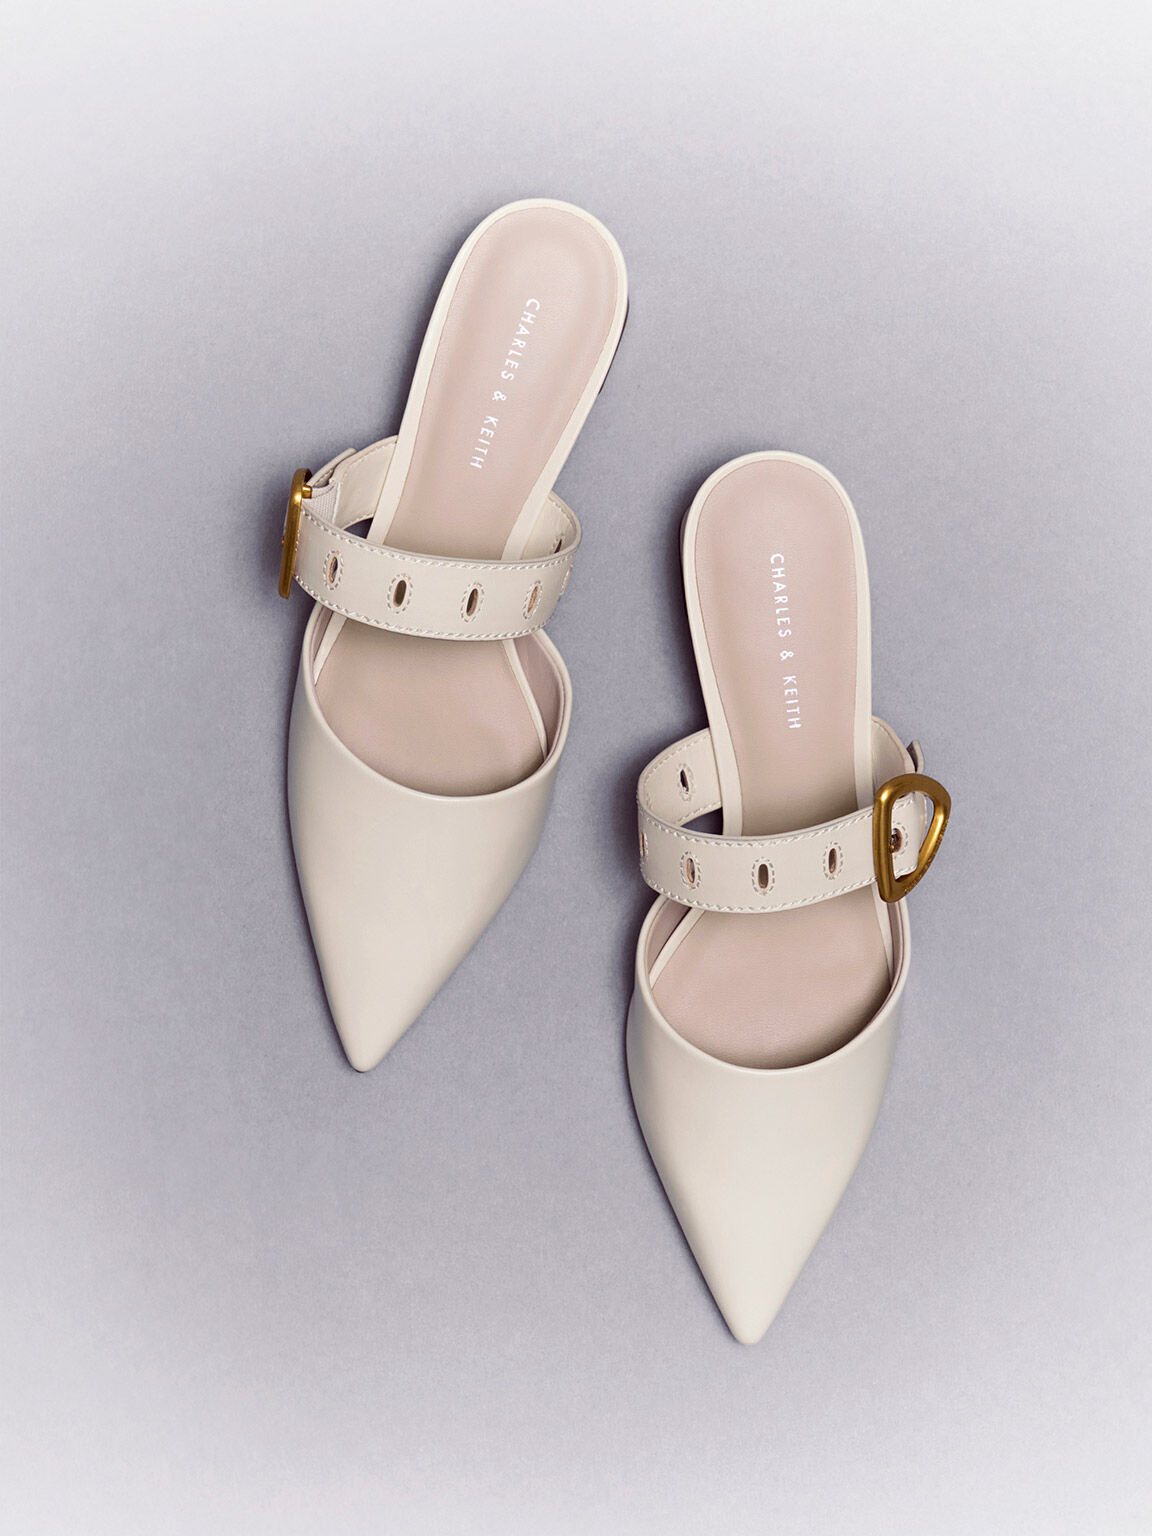 Sepphe Cut-Out Heeled Mules - Cream